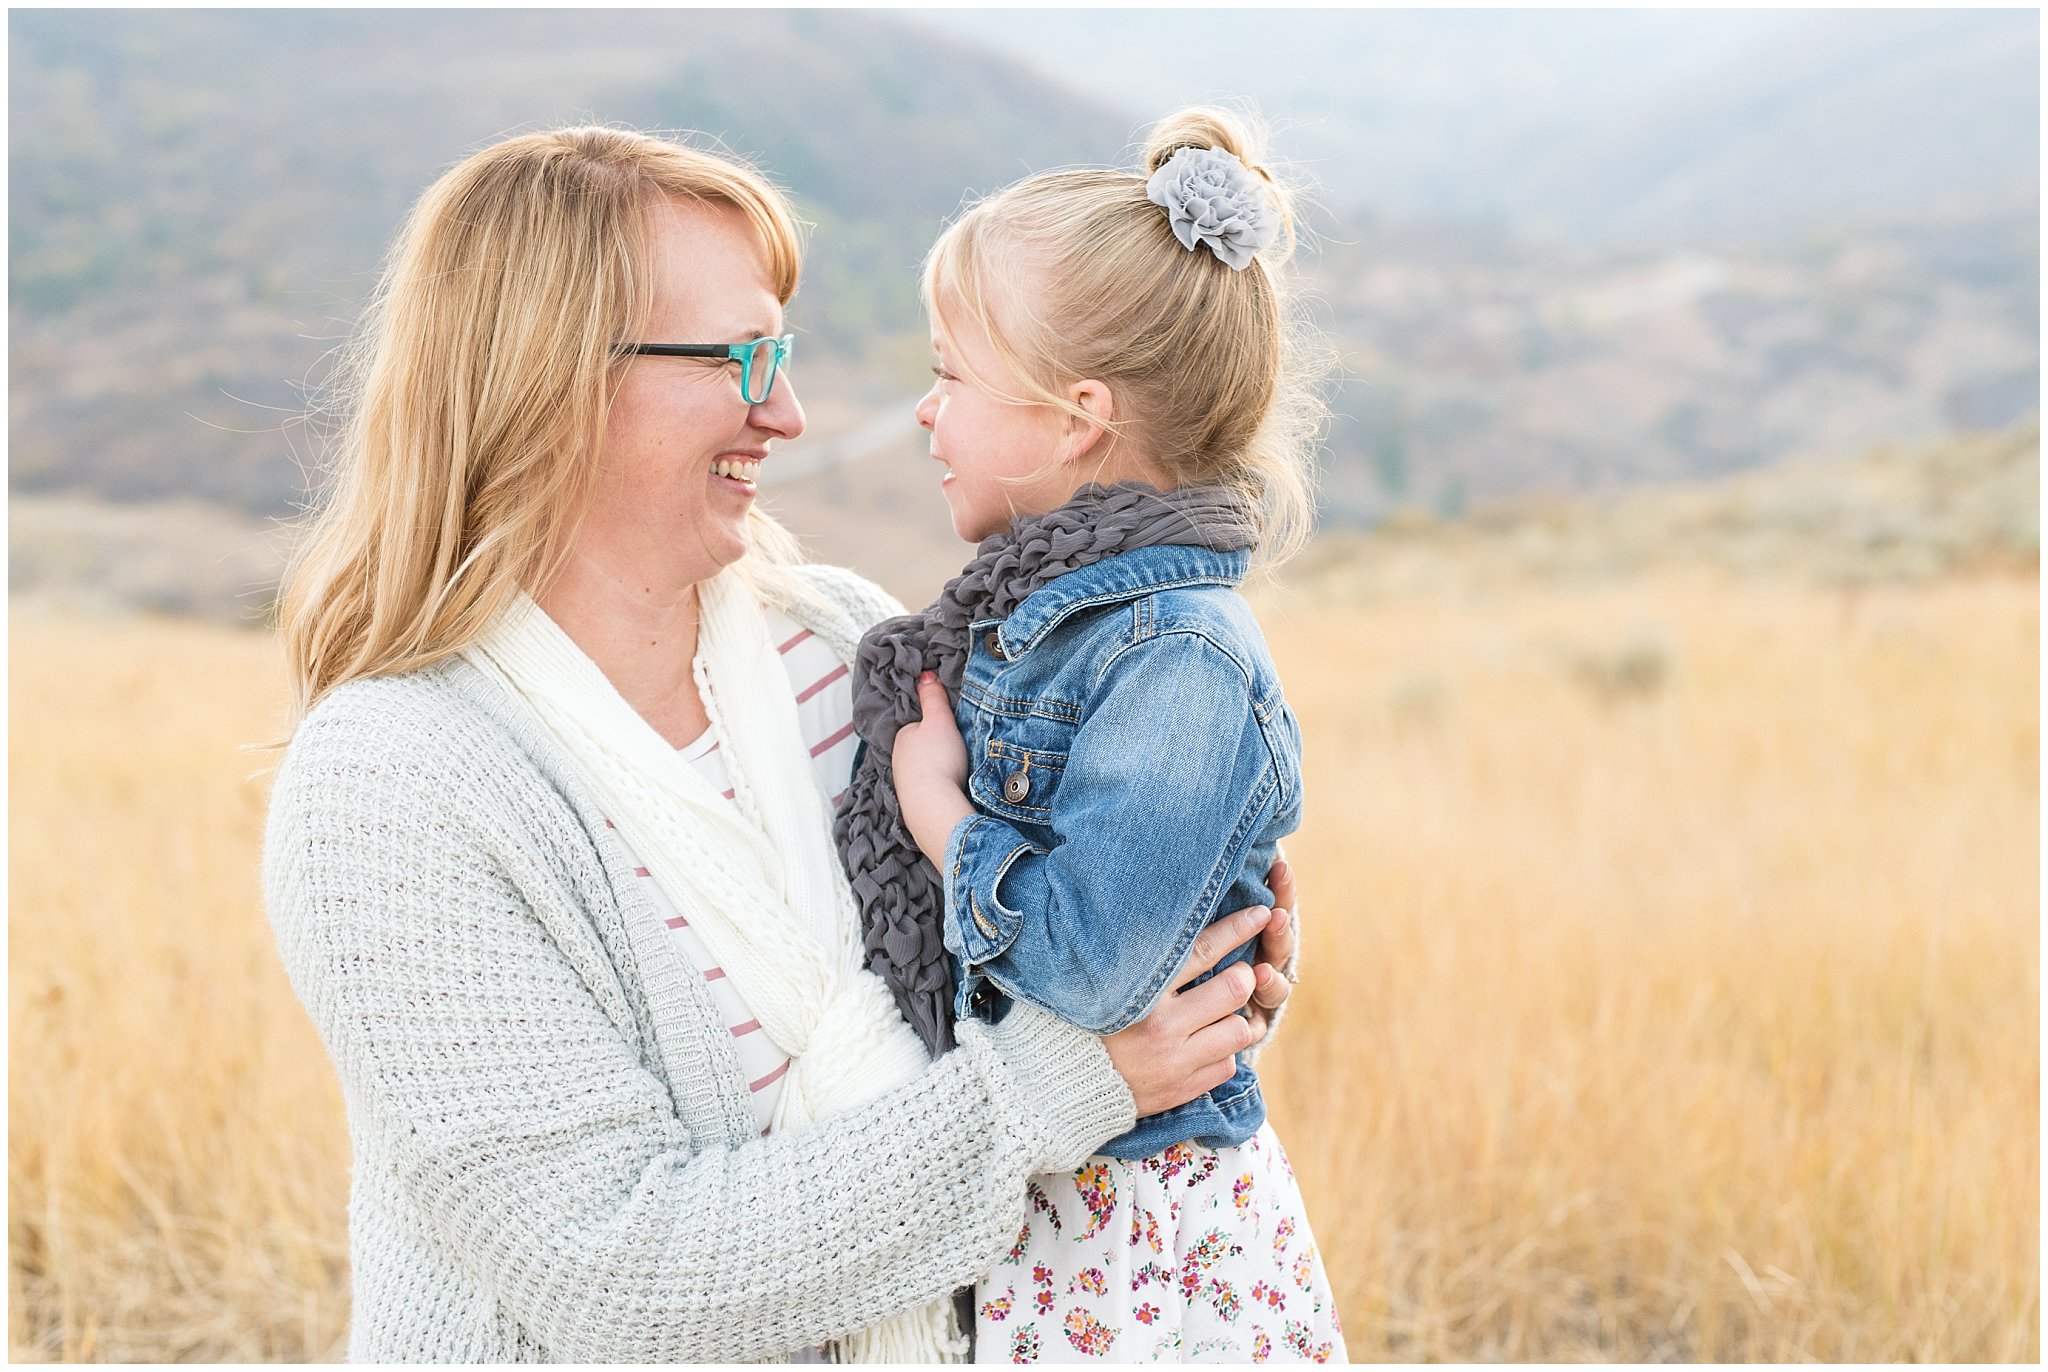 Mom and daughter laughing | Fall Family Pictures in the Mountains | Snowbasin, Utah | Jessie and Dallin Photography